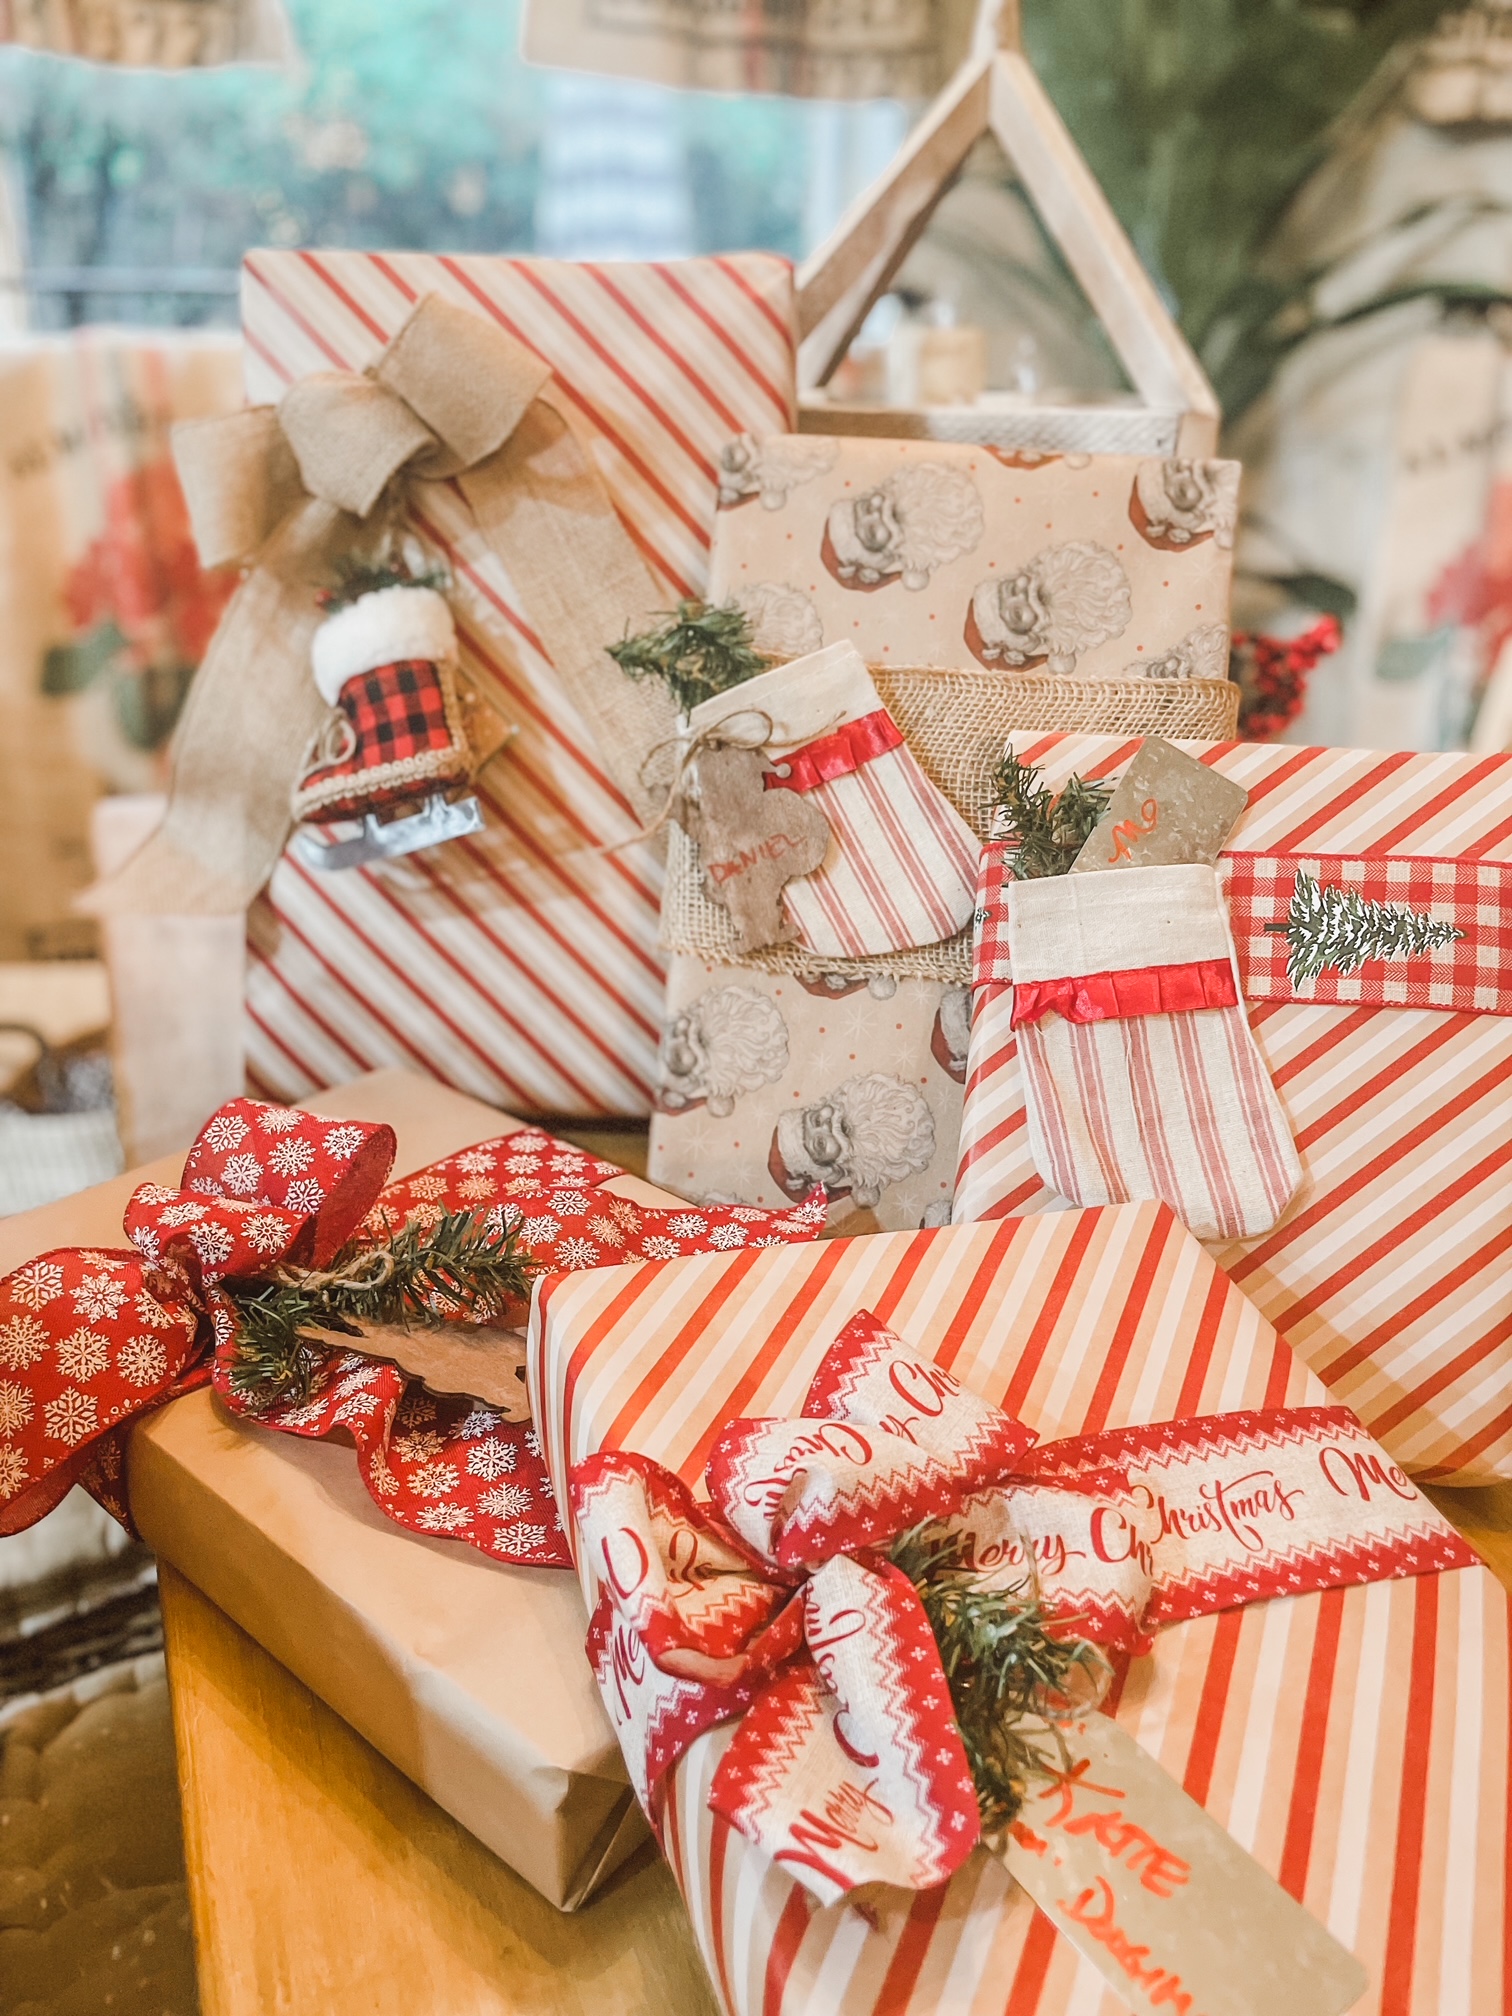 Gift Wrapping Ideas for Christmas